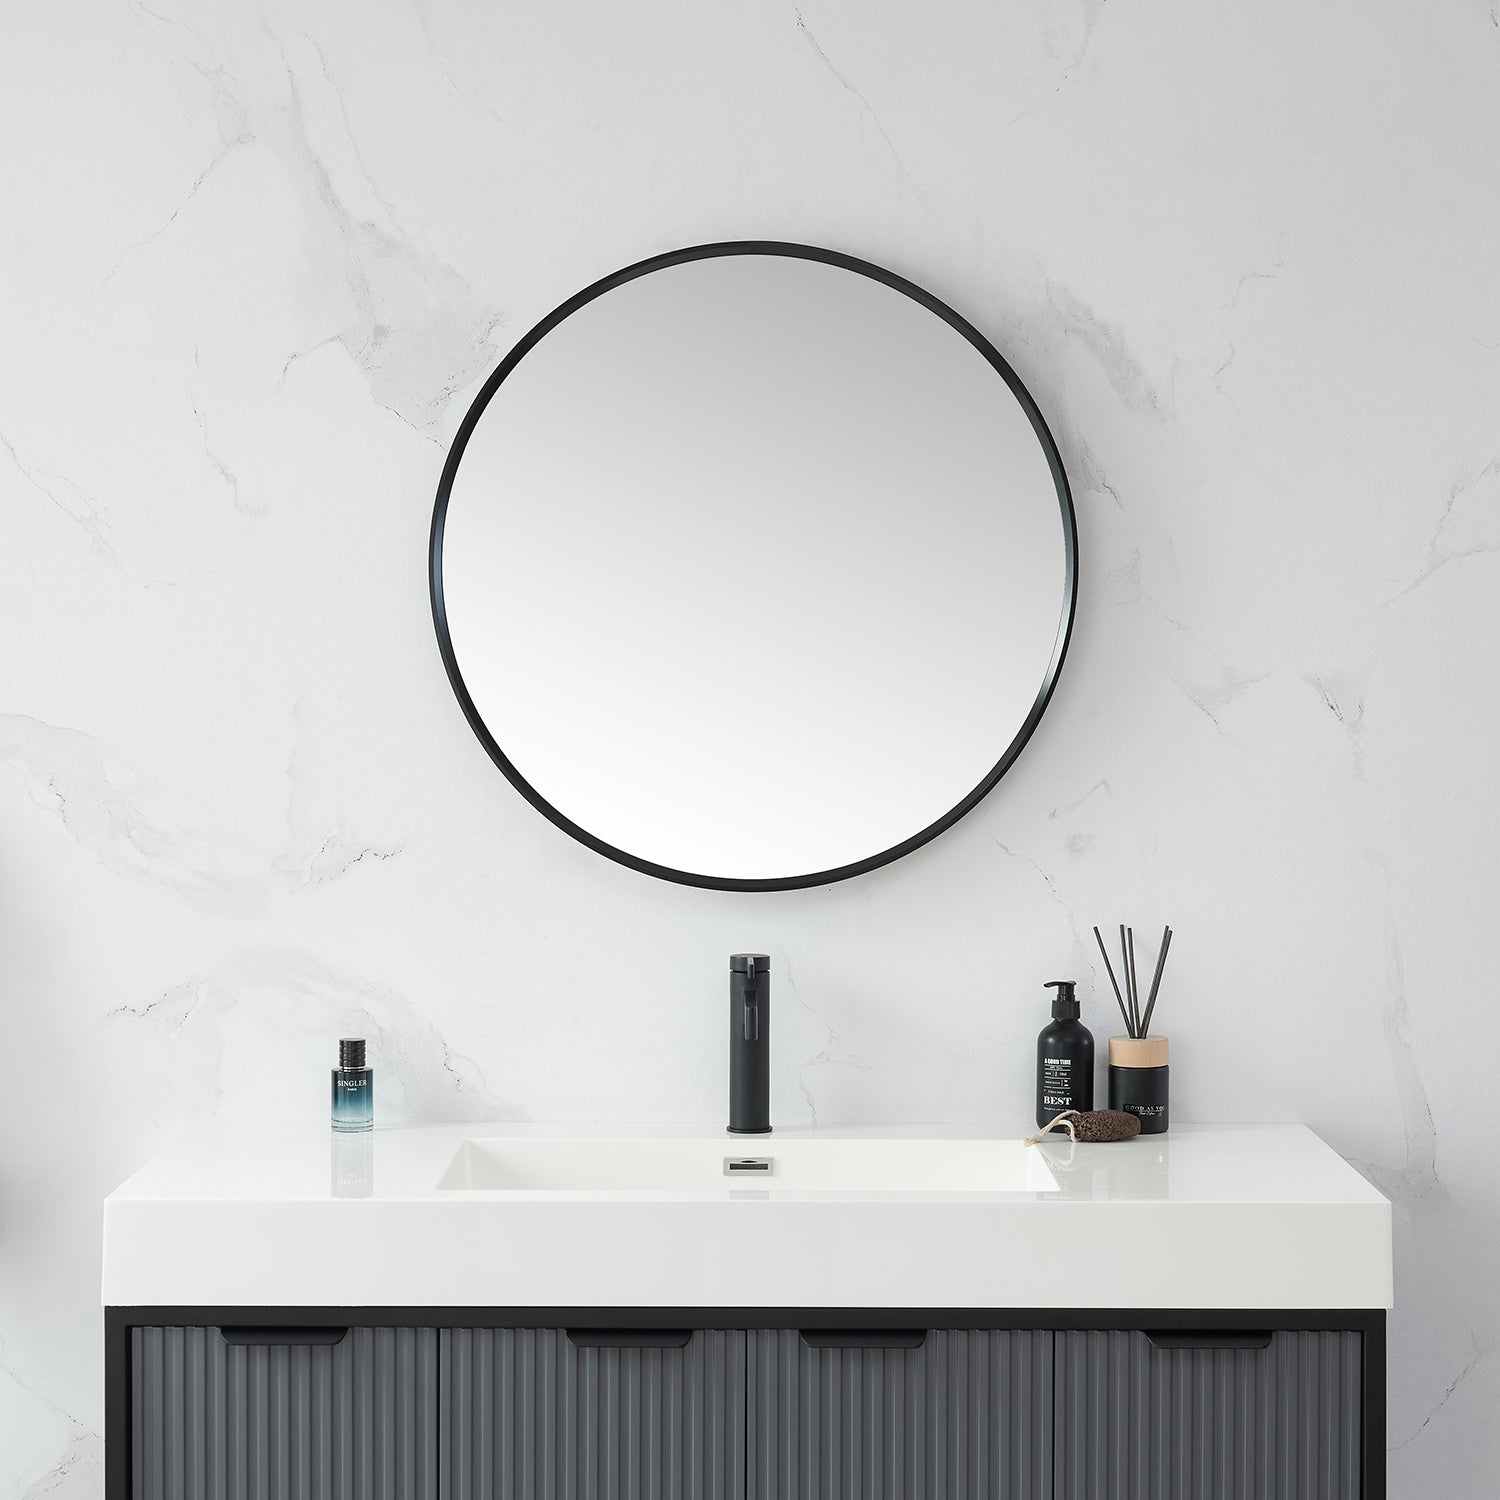 Cascante 28 in. W x 28 in. H Round Metal Wall Mirror in Brushed Black